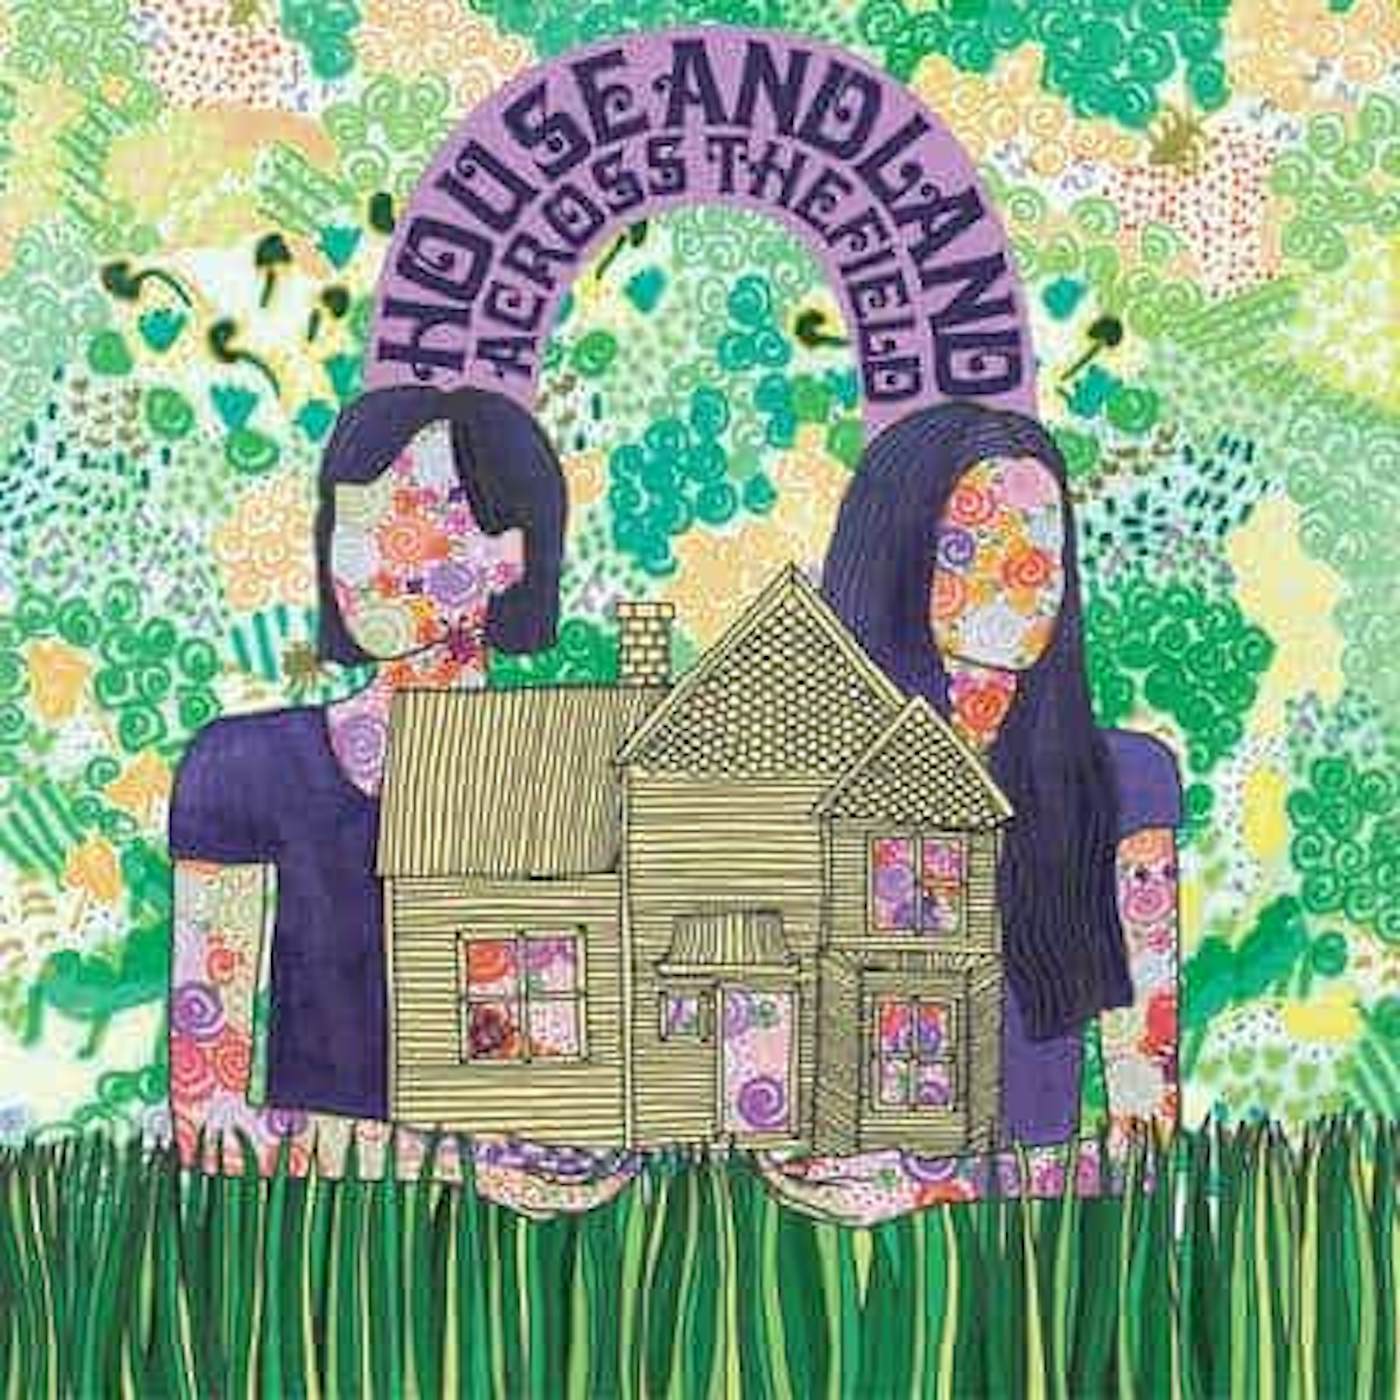 House and Land Across The Field Vinyl Record